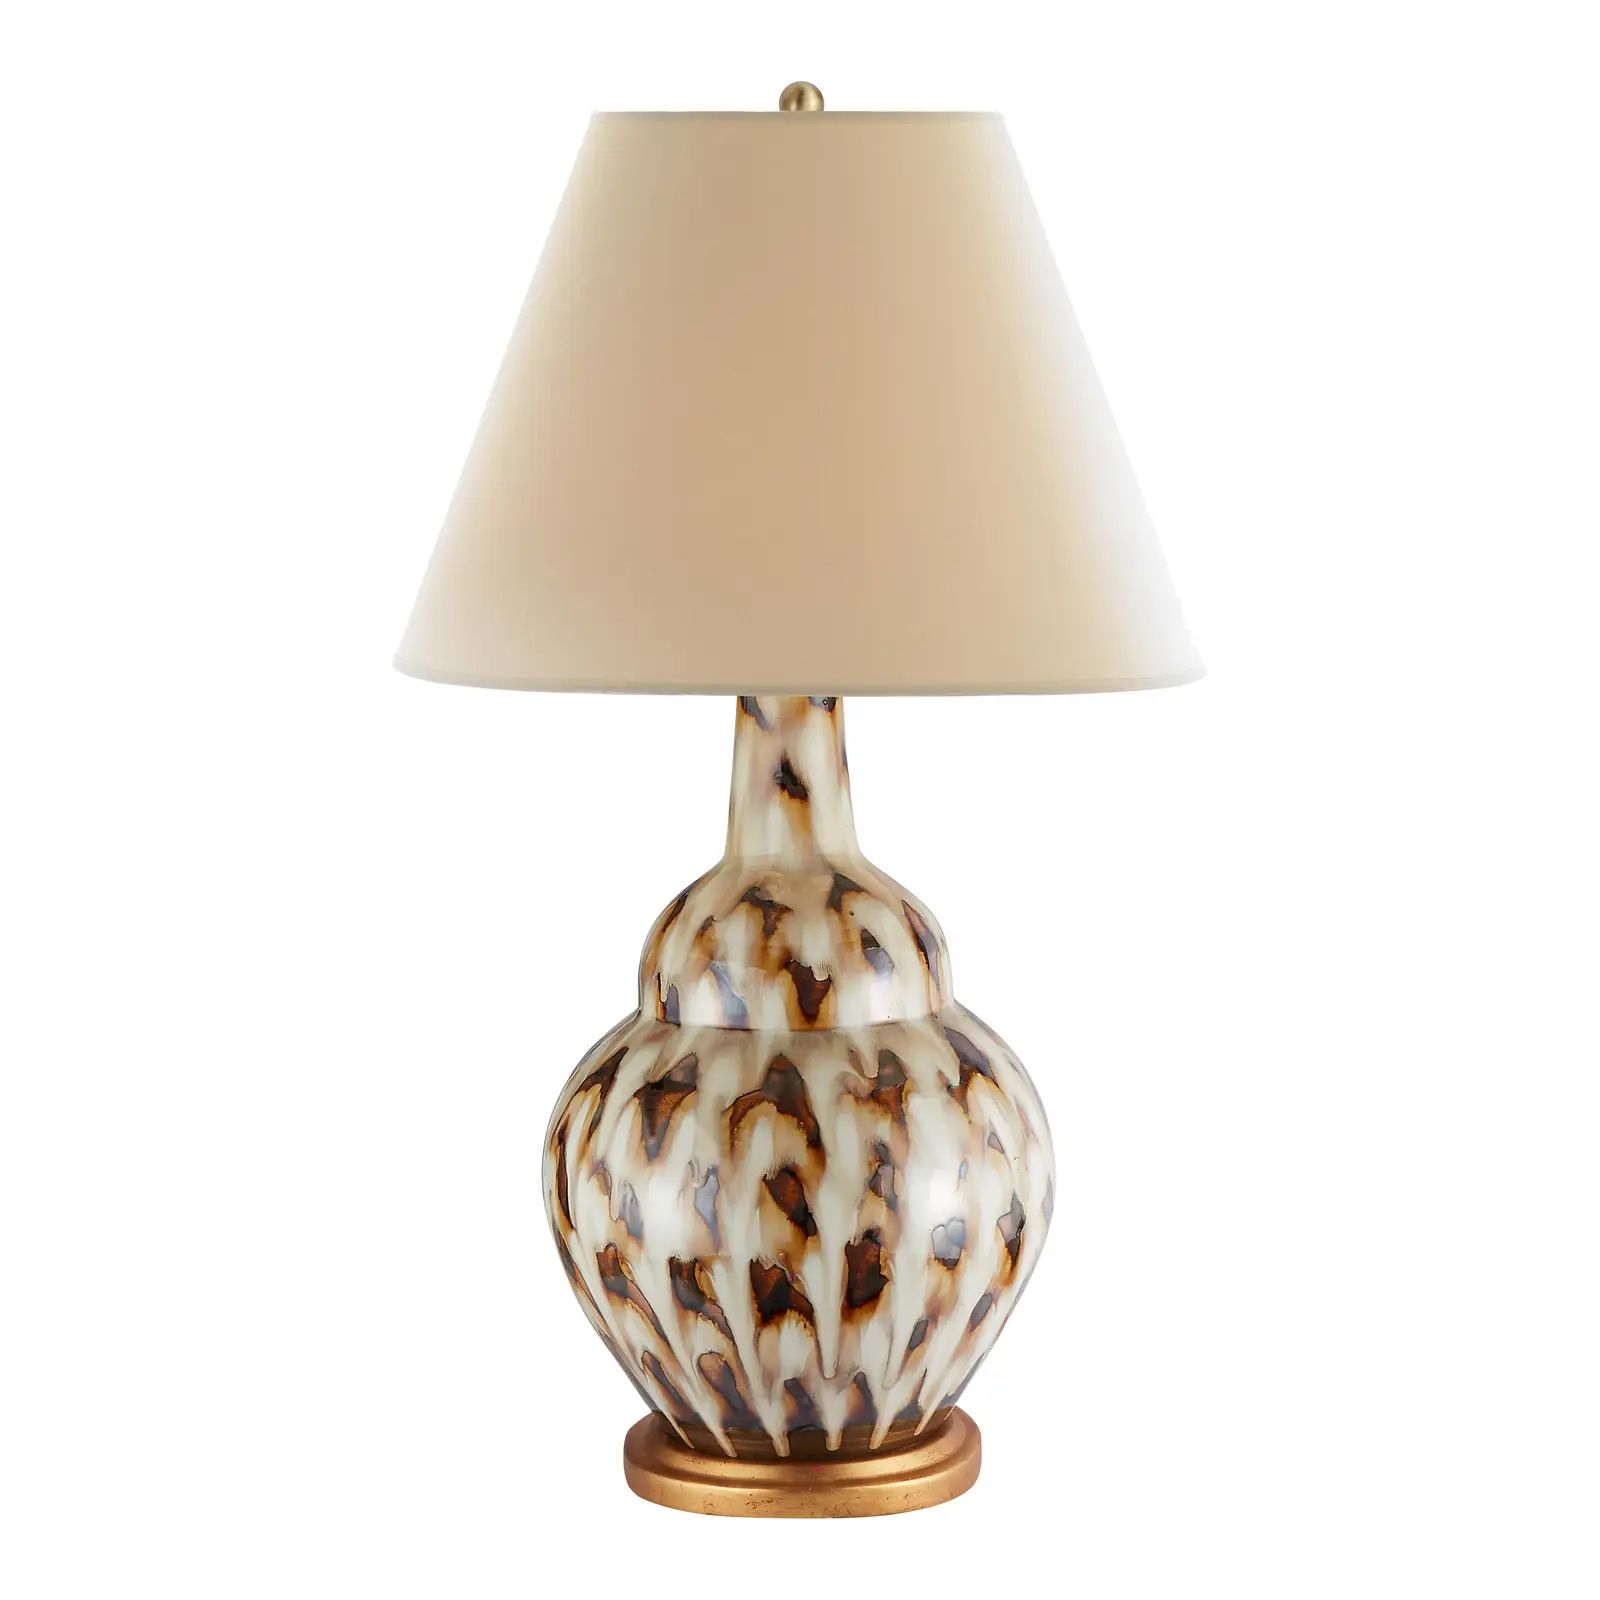 Bunny Williams Home Pheasant Feather Lamp, Brown | Chairish